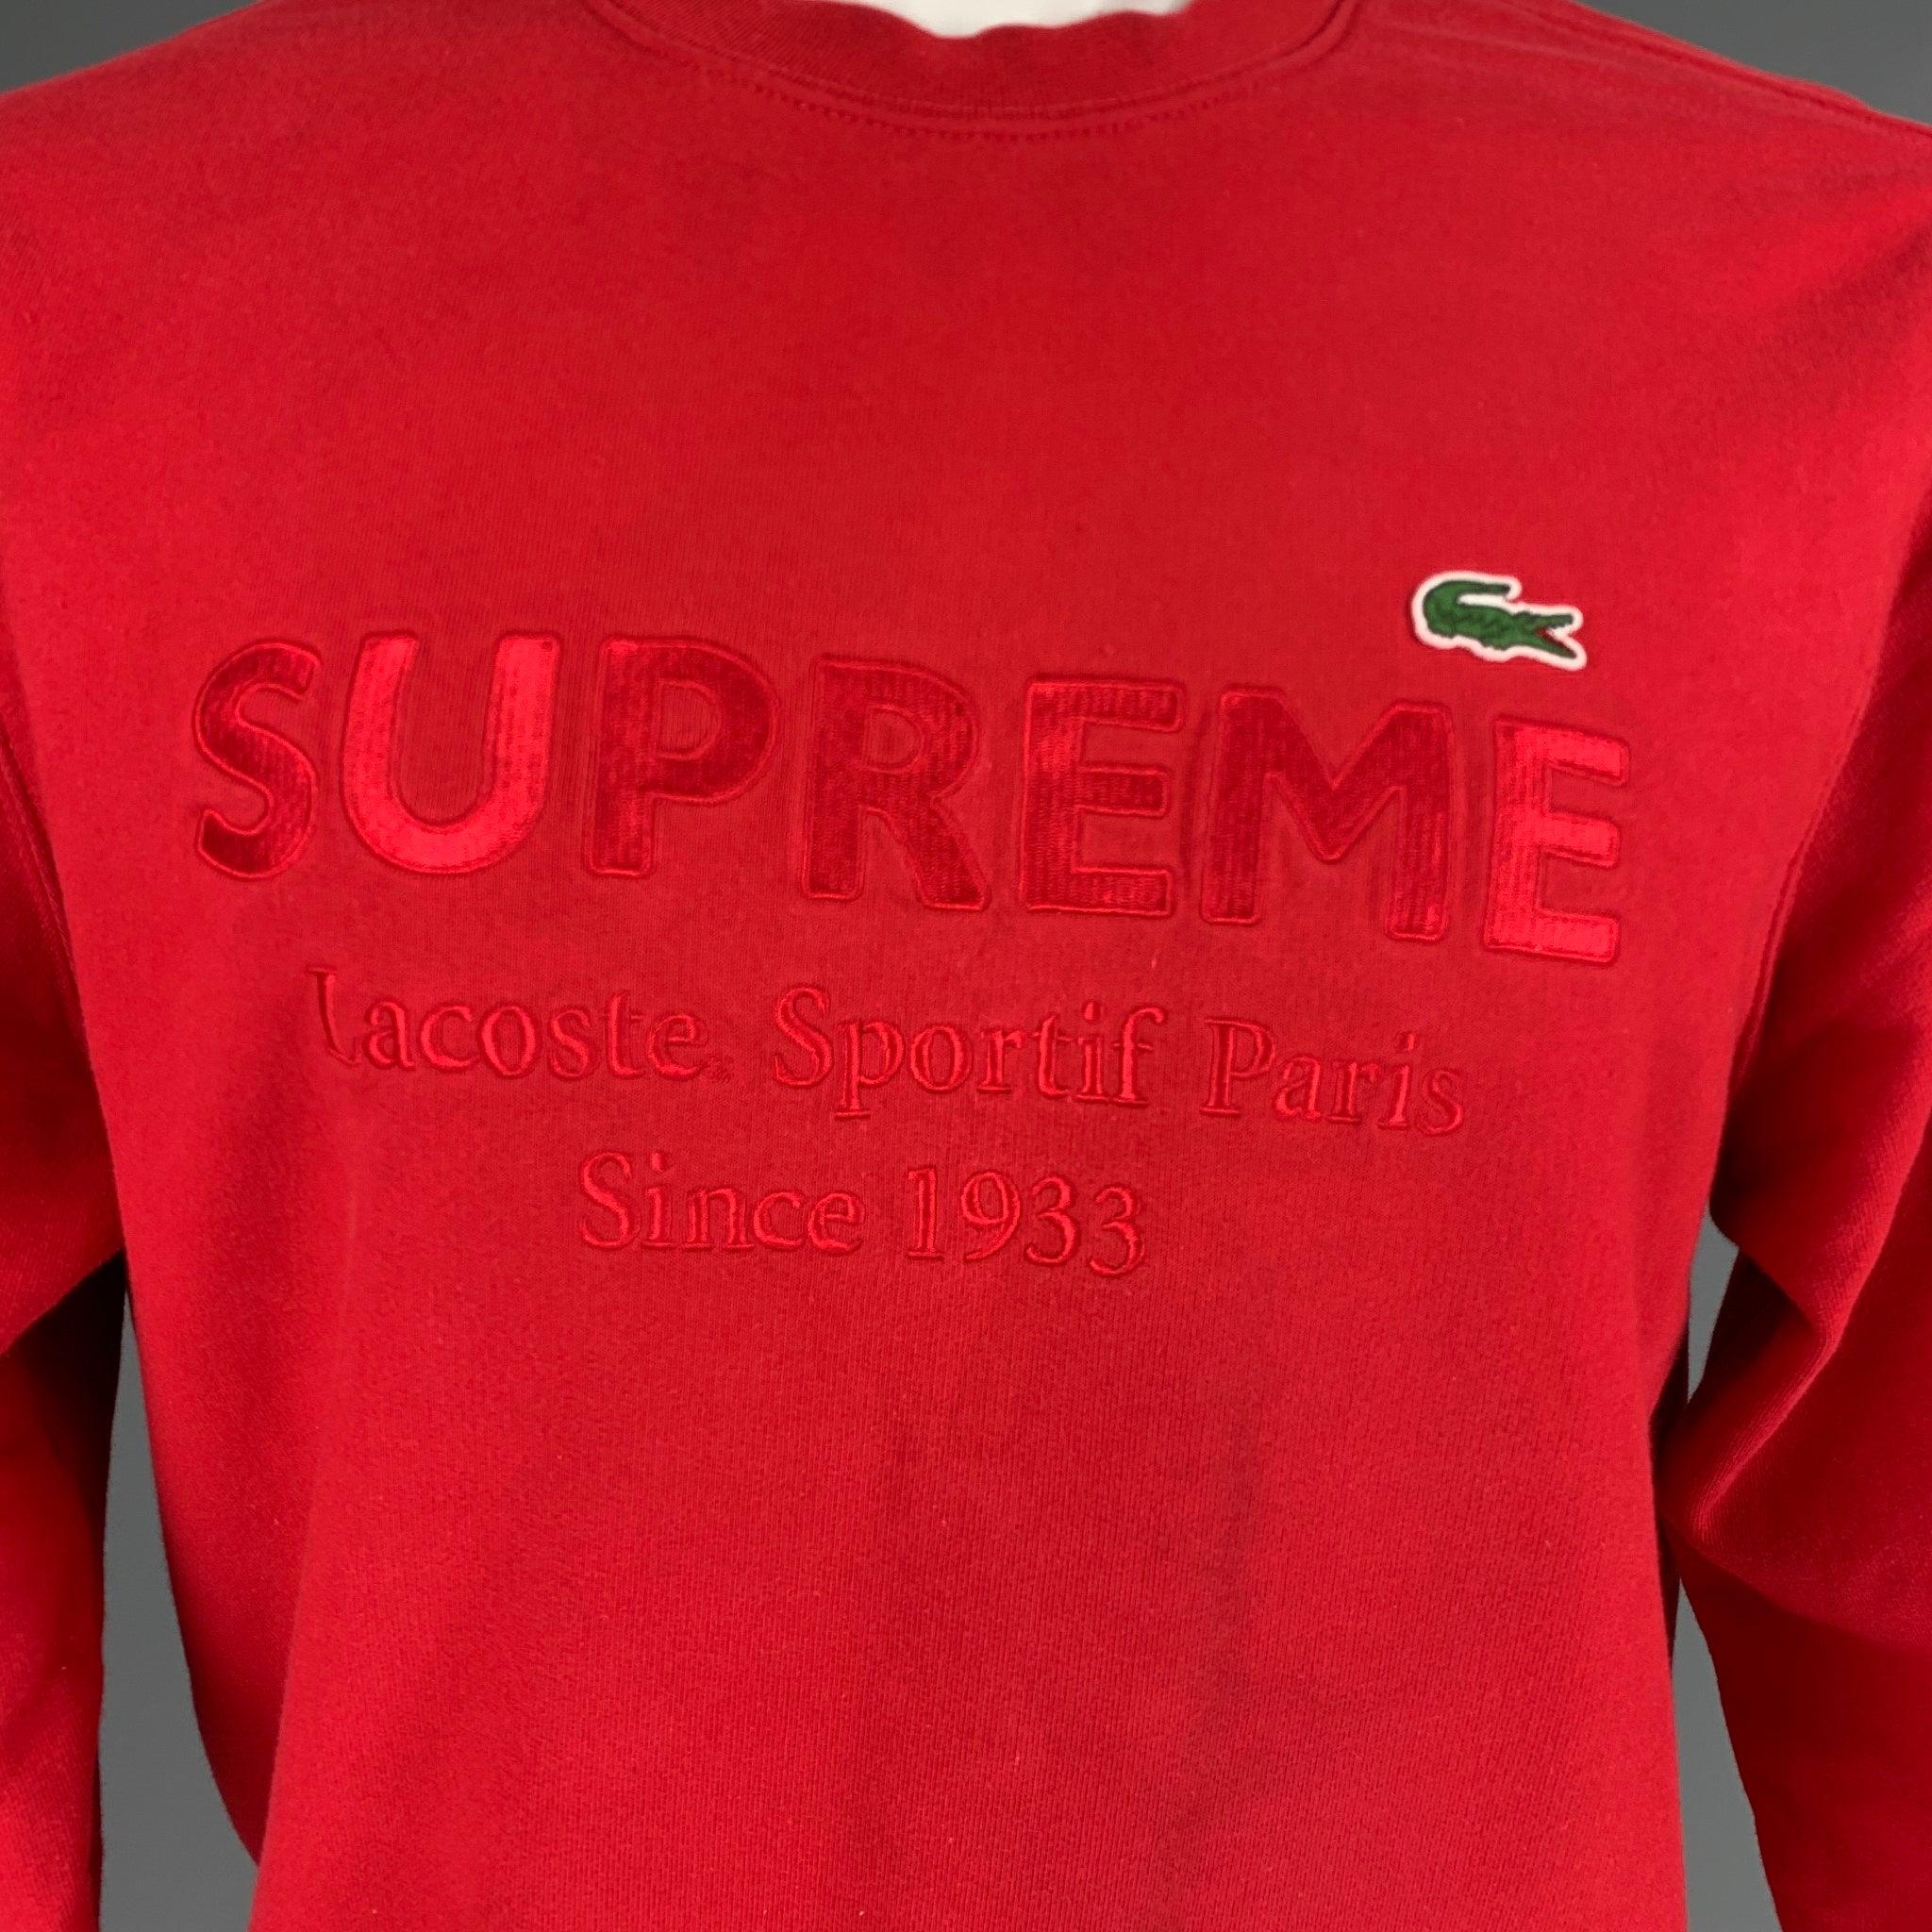 SUPREME x LACOSTE L!VE sweatshirt
in a
red cotton knit featuring alligator logo, embroidered text, and a crew neck.Good Pre-Owned Condition. Moderate mark on back. 

Marked:   S 

Measurements: 
 
Shoulder: 17.5 inches Chest: 44 inches Sleeve: 24